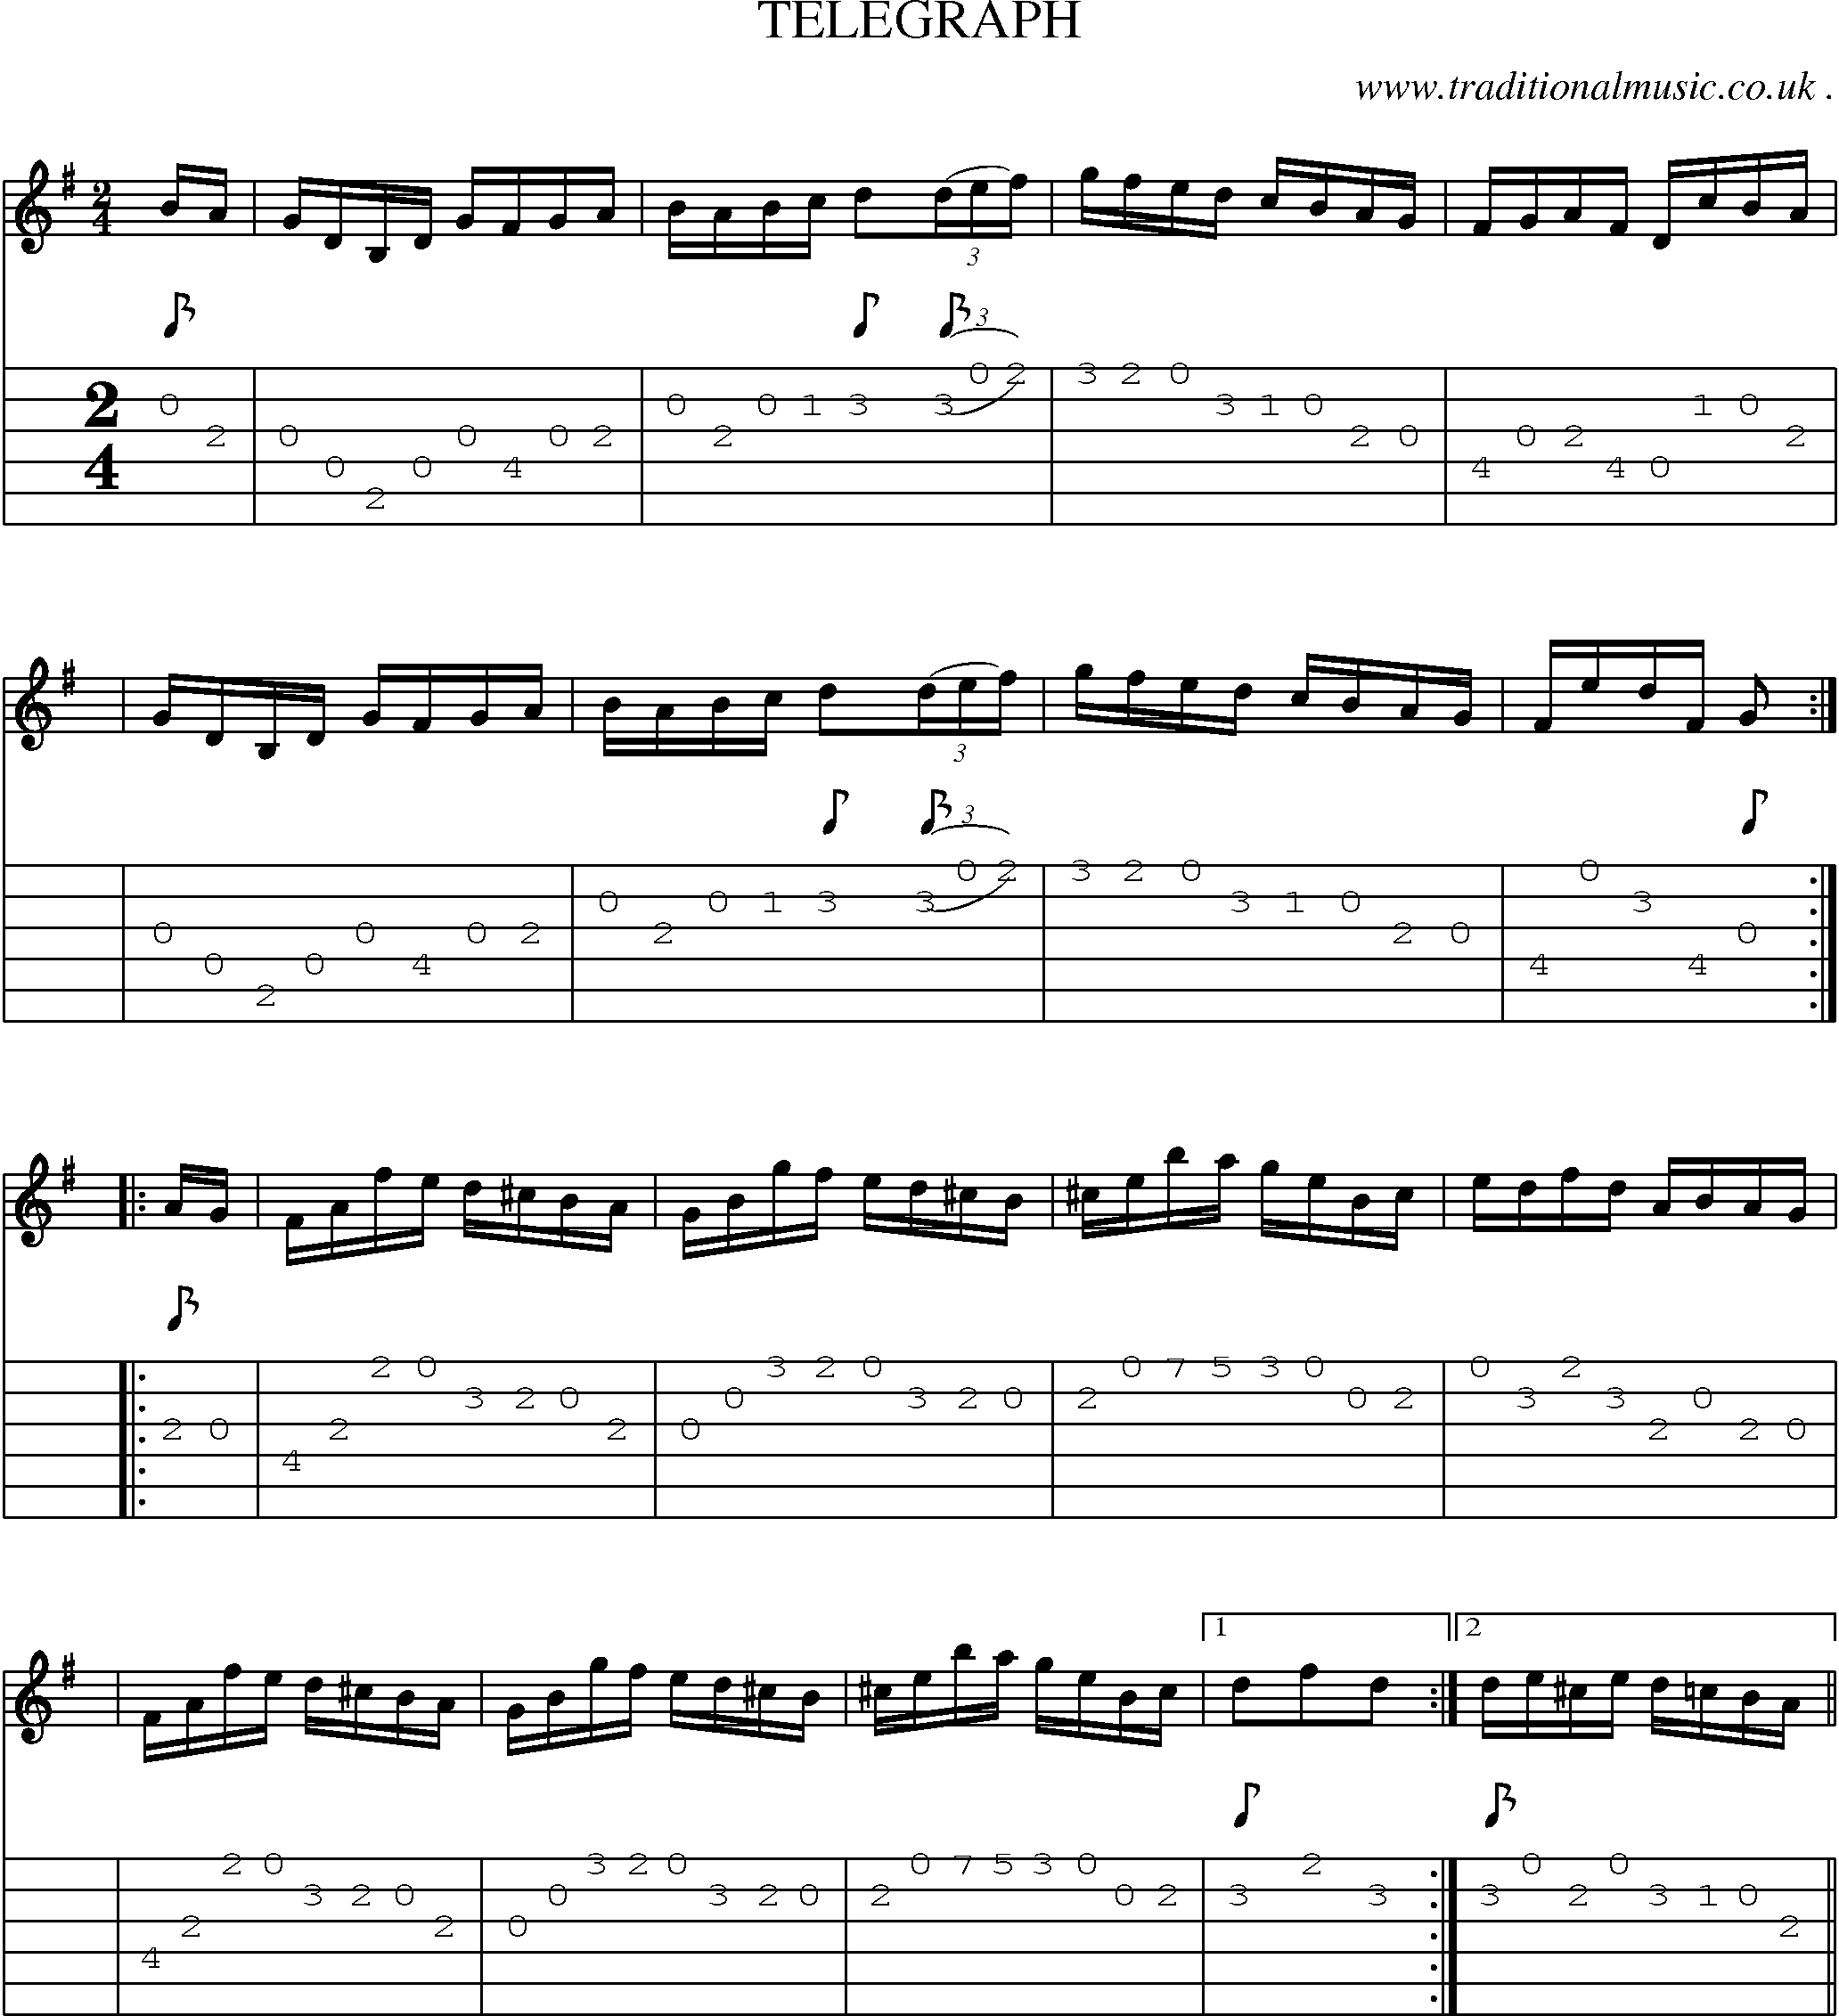 Sheet-Music and Guitar Tabs for Telegraph